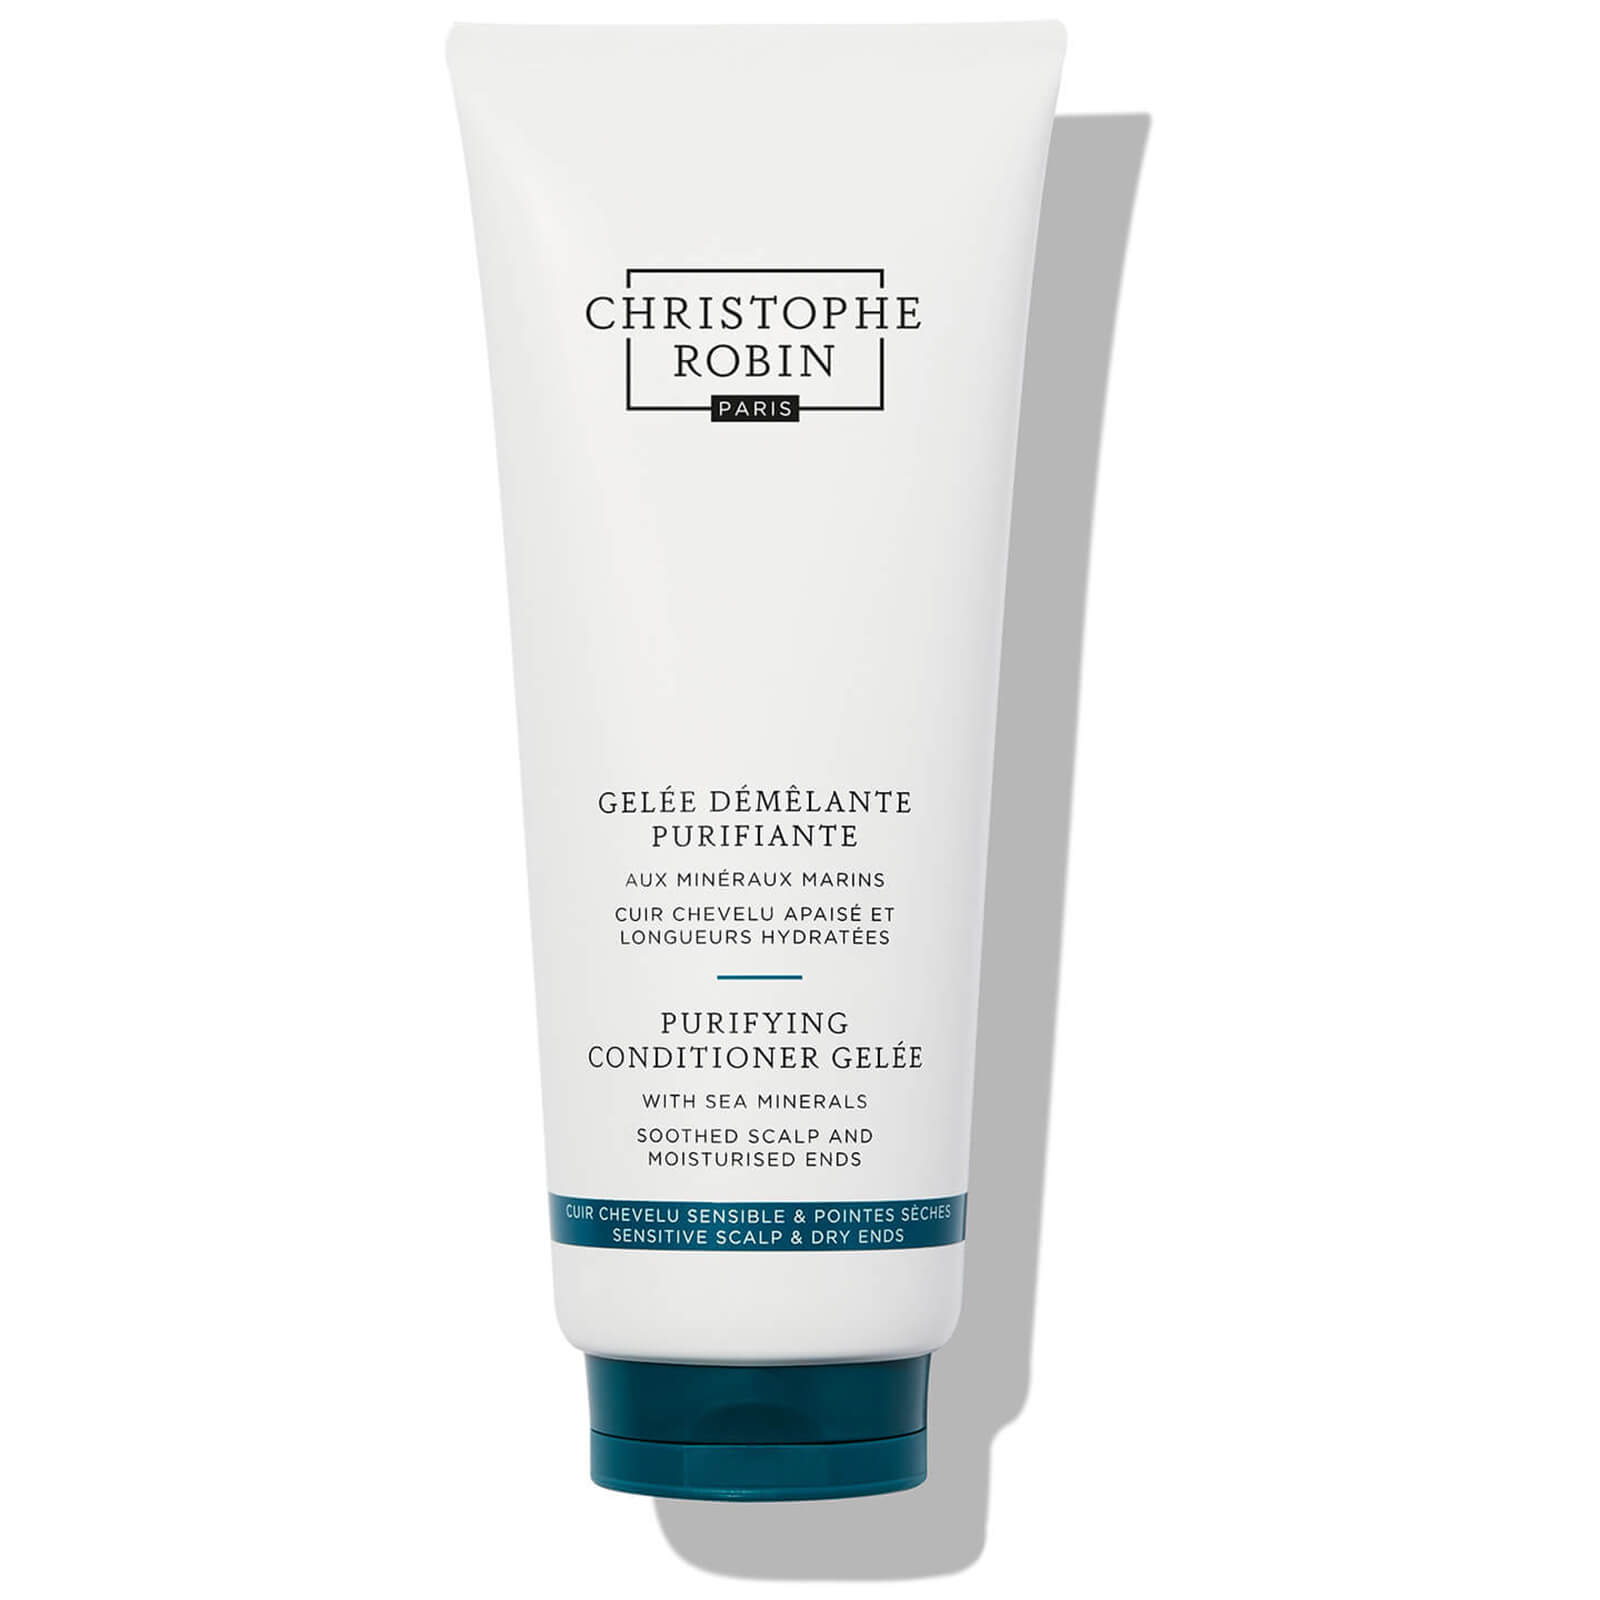 christophe robin haarspÃ¼lung purifying conditioner gelee (200 ml)